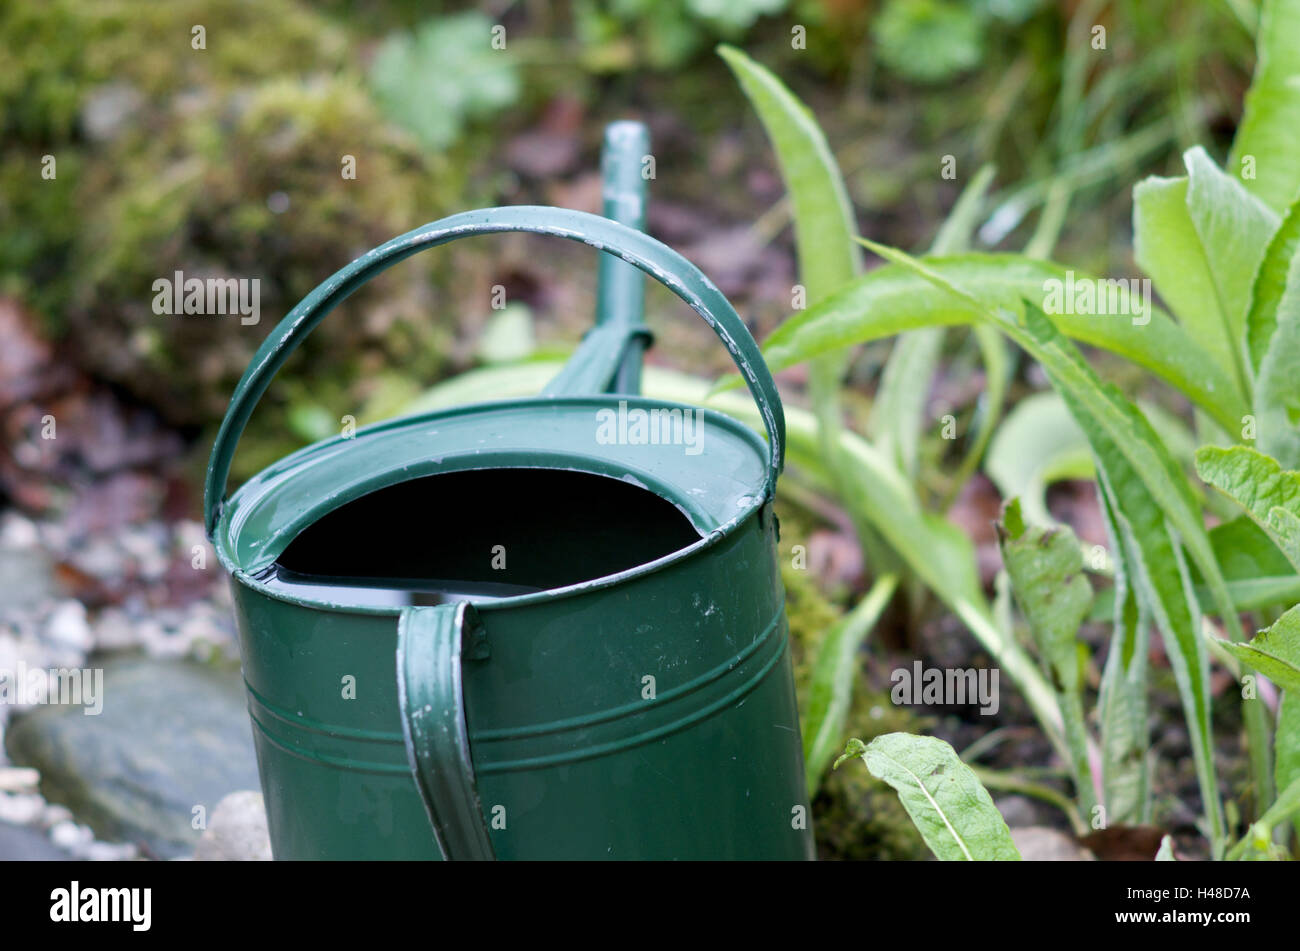 Tin watering can in vegetable bed, Stock Photo